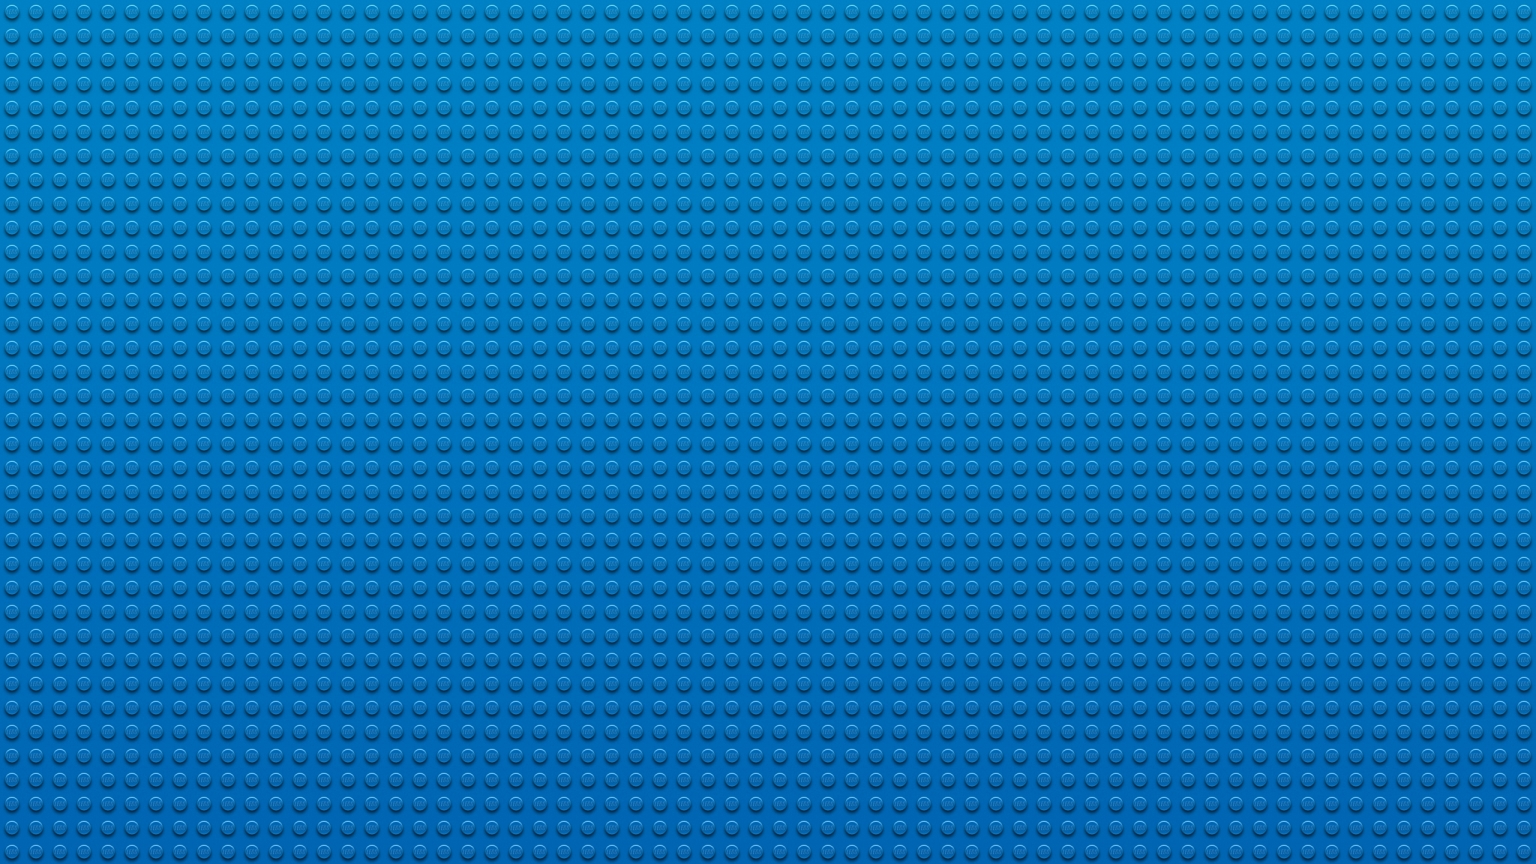 Lego Texture for 1536 x 864 HDTV resolution